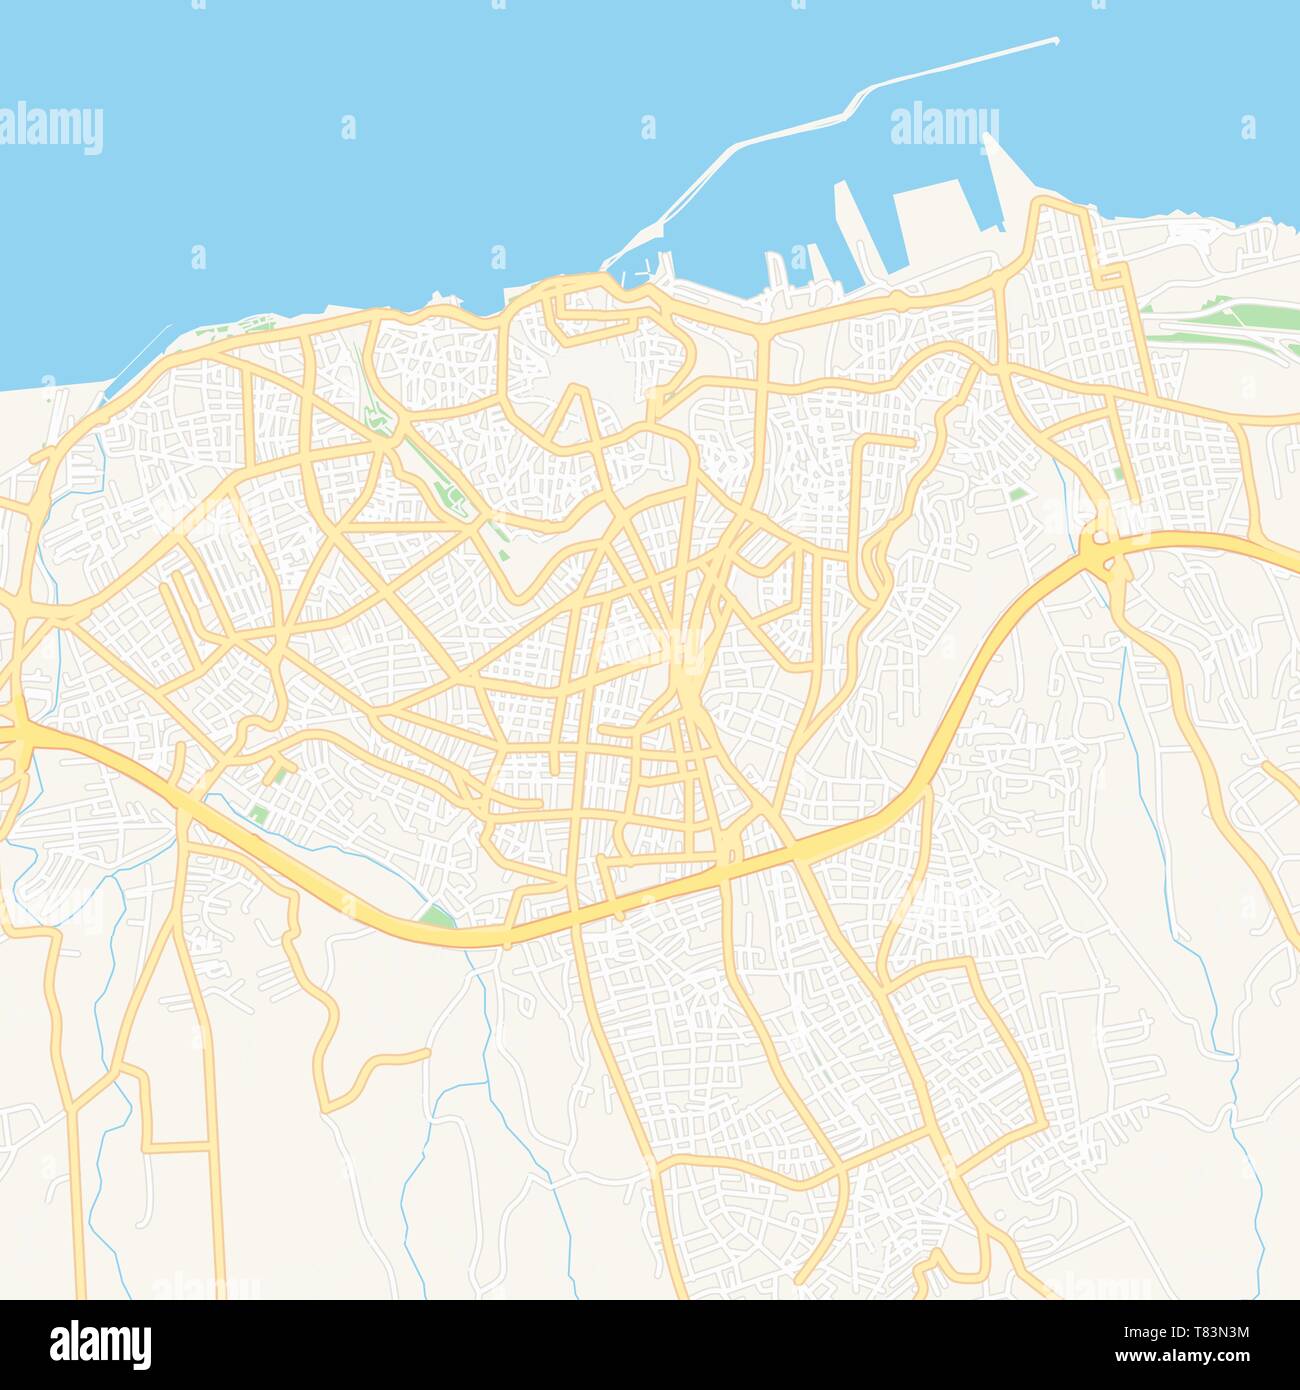 Printable map of Heraklion, Greece with main and secondary roads and larger railways. This map is carefully designed for routing and placing individua Stock Vector